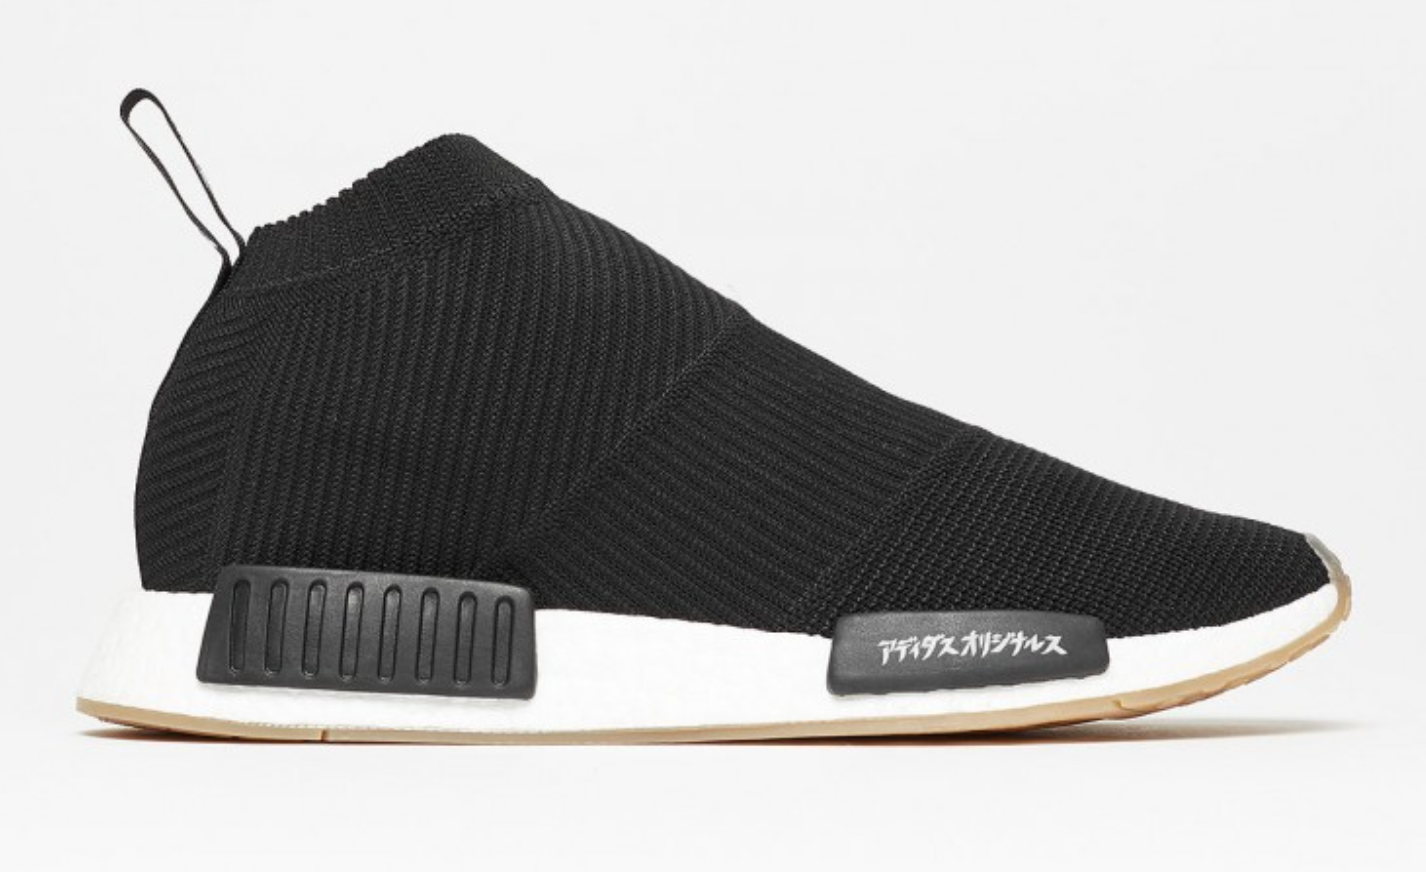 The United Arrows U0026 Sons X Adidas Nmd City Sock Will Be Releasing Soon, Which Is Somewhat Similar To The Recent Winter Wool And Black Gum Versions. - United Arrows, Transparent background PNG HD thumbnail